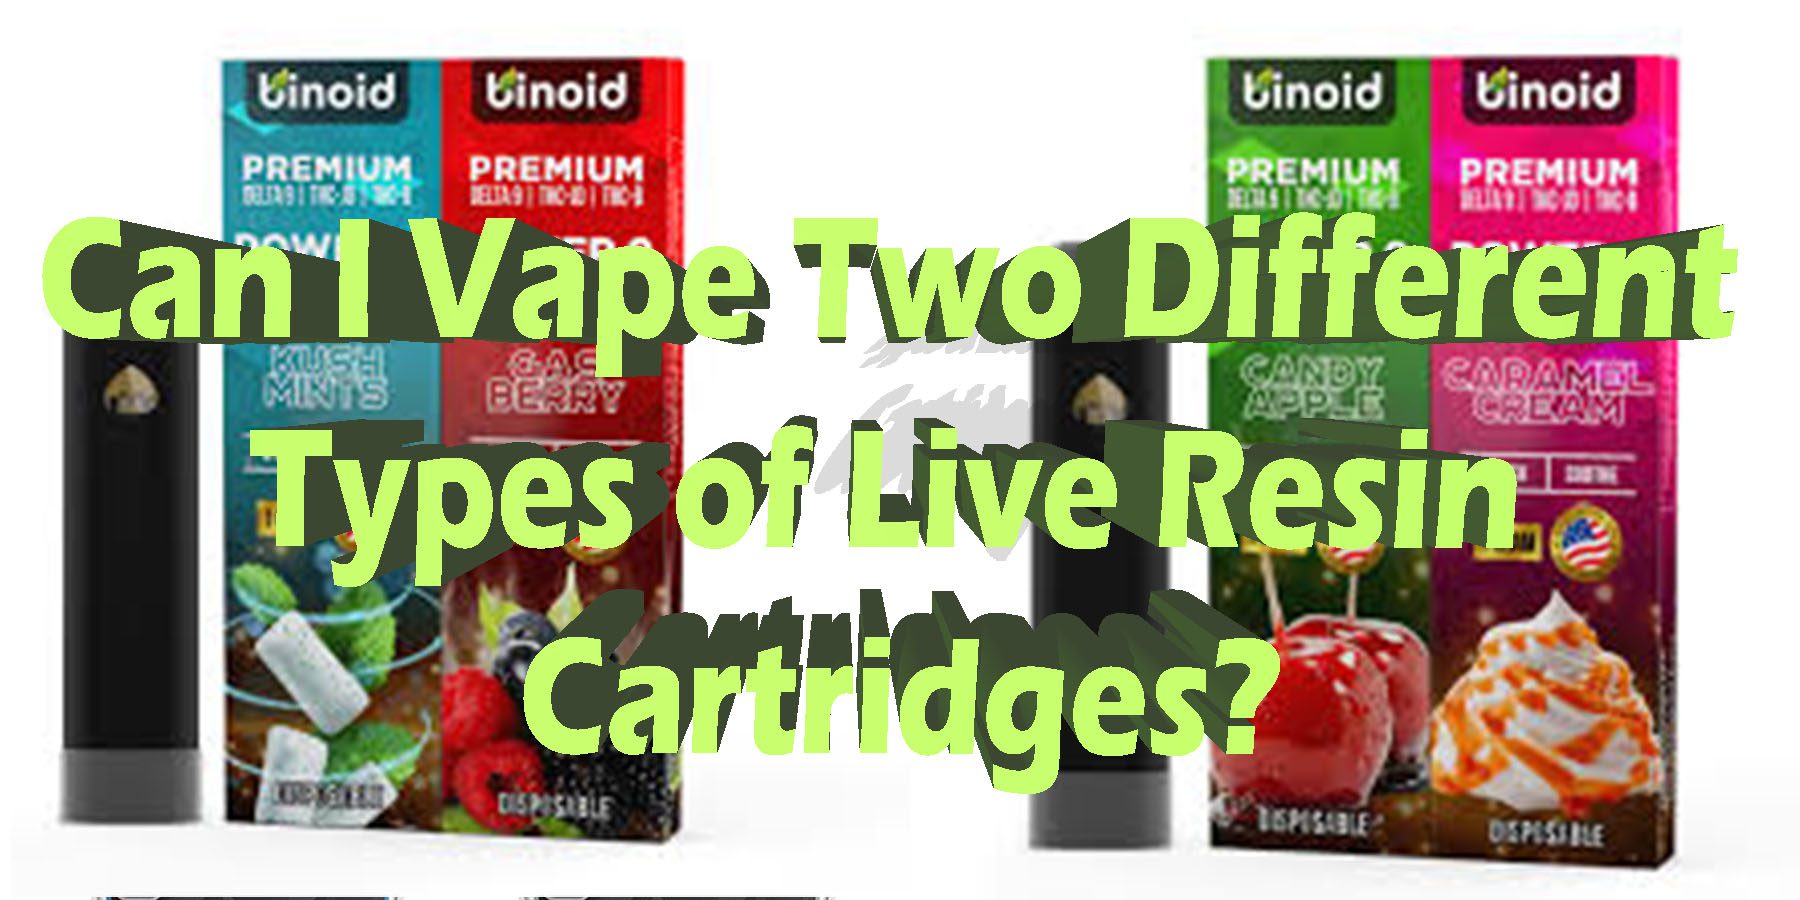 Can I Vape Two Different Types of Live Resin Cartridges HowToGetNearMe BestPlace LowestPrice Coupon Discount For Smoking Best Brand D9 D8 THCA Indoor Good Binoid.